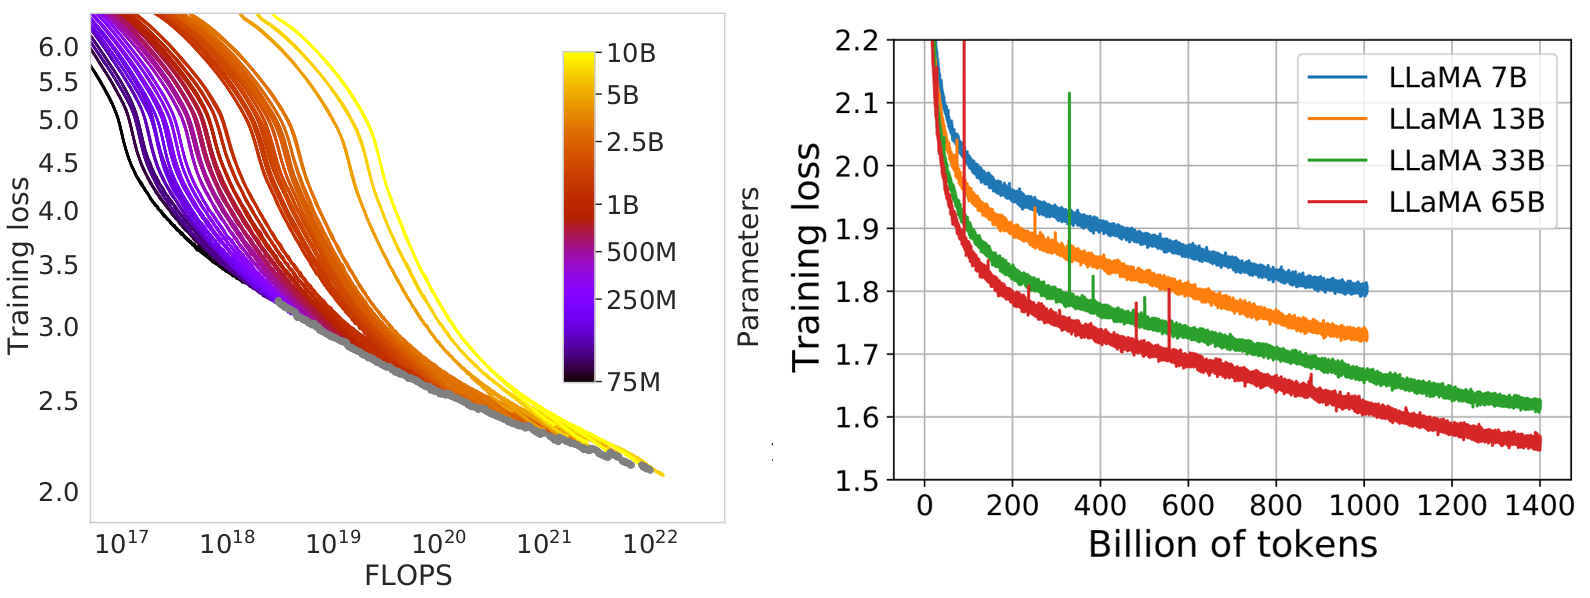 a desirable scaling curve - deepmind's chinchilla to the left, meta's llama to the right